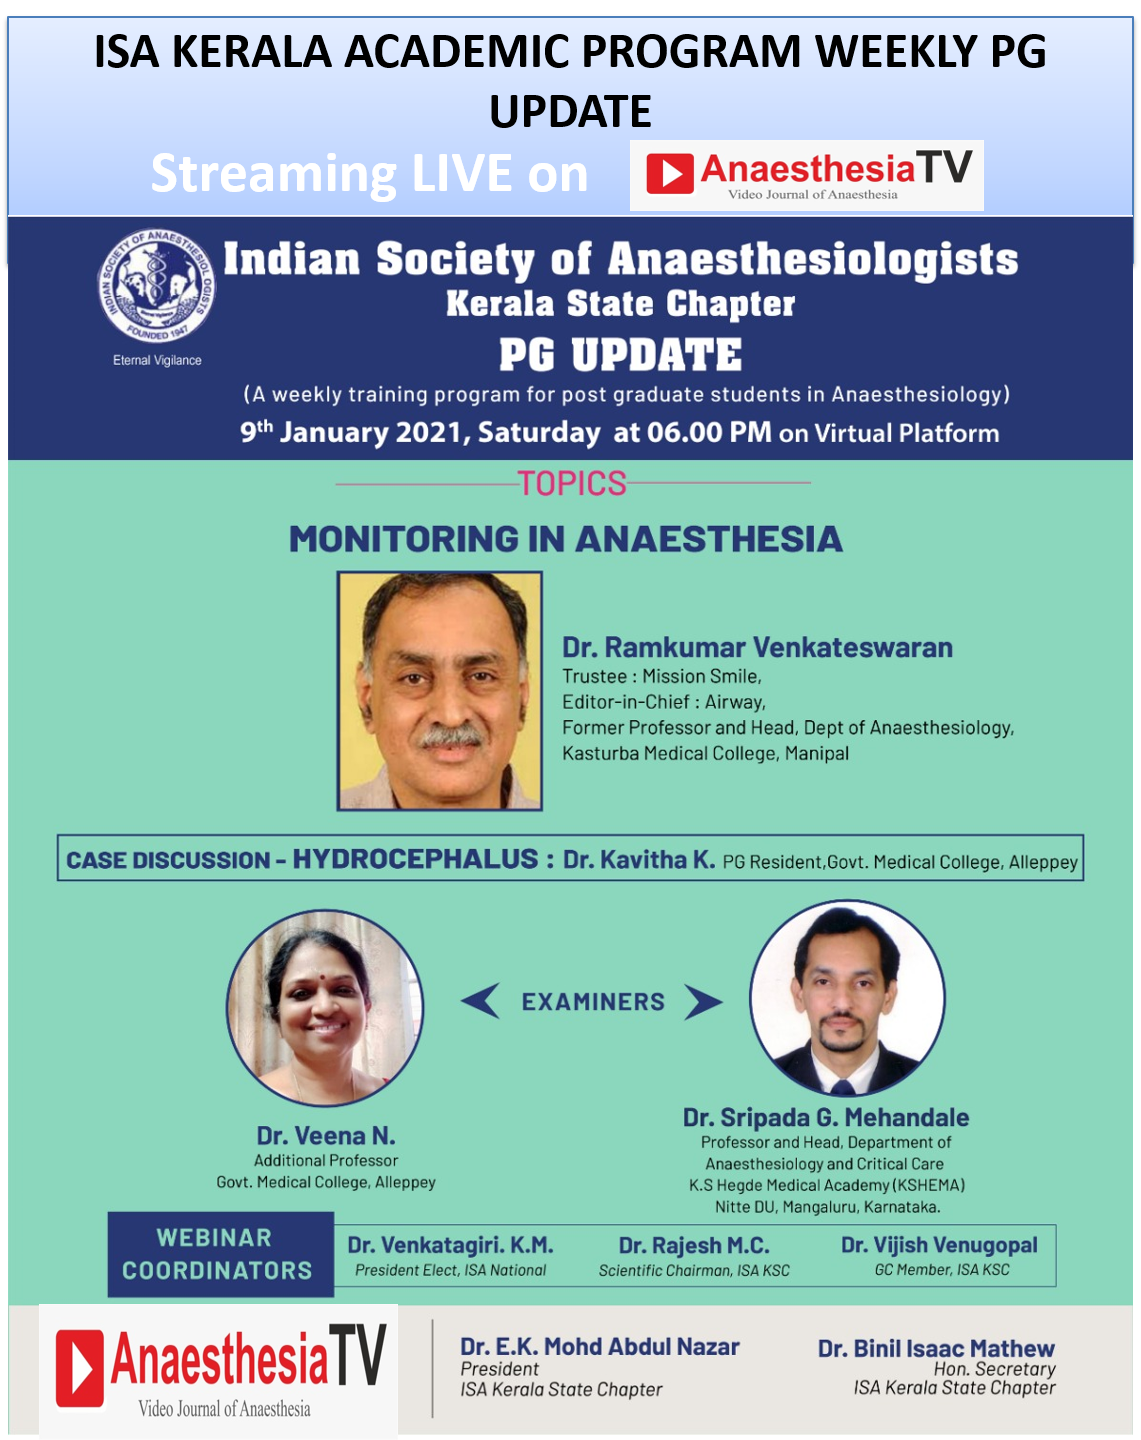 ISA Kerala State Chapter PG UPDATE : MONITORING IN ANAESTHESIA by Dr. Ramkumar Venkateswaran on 9th January 2021, Saturday at 6.00 pm IST